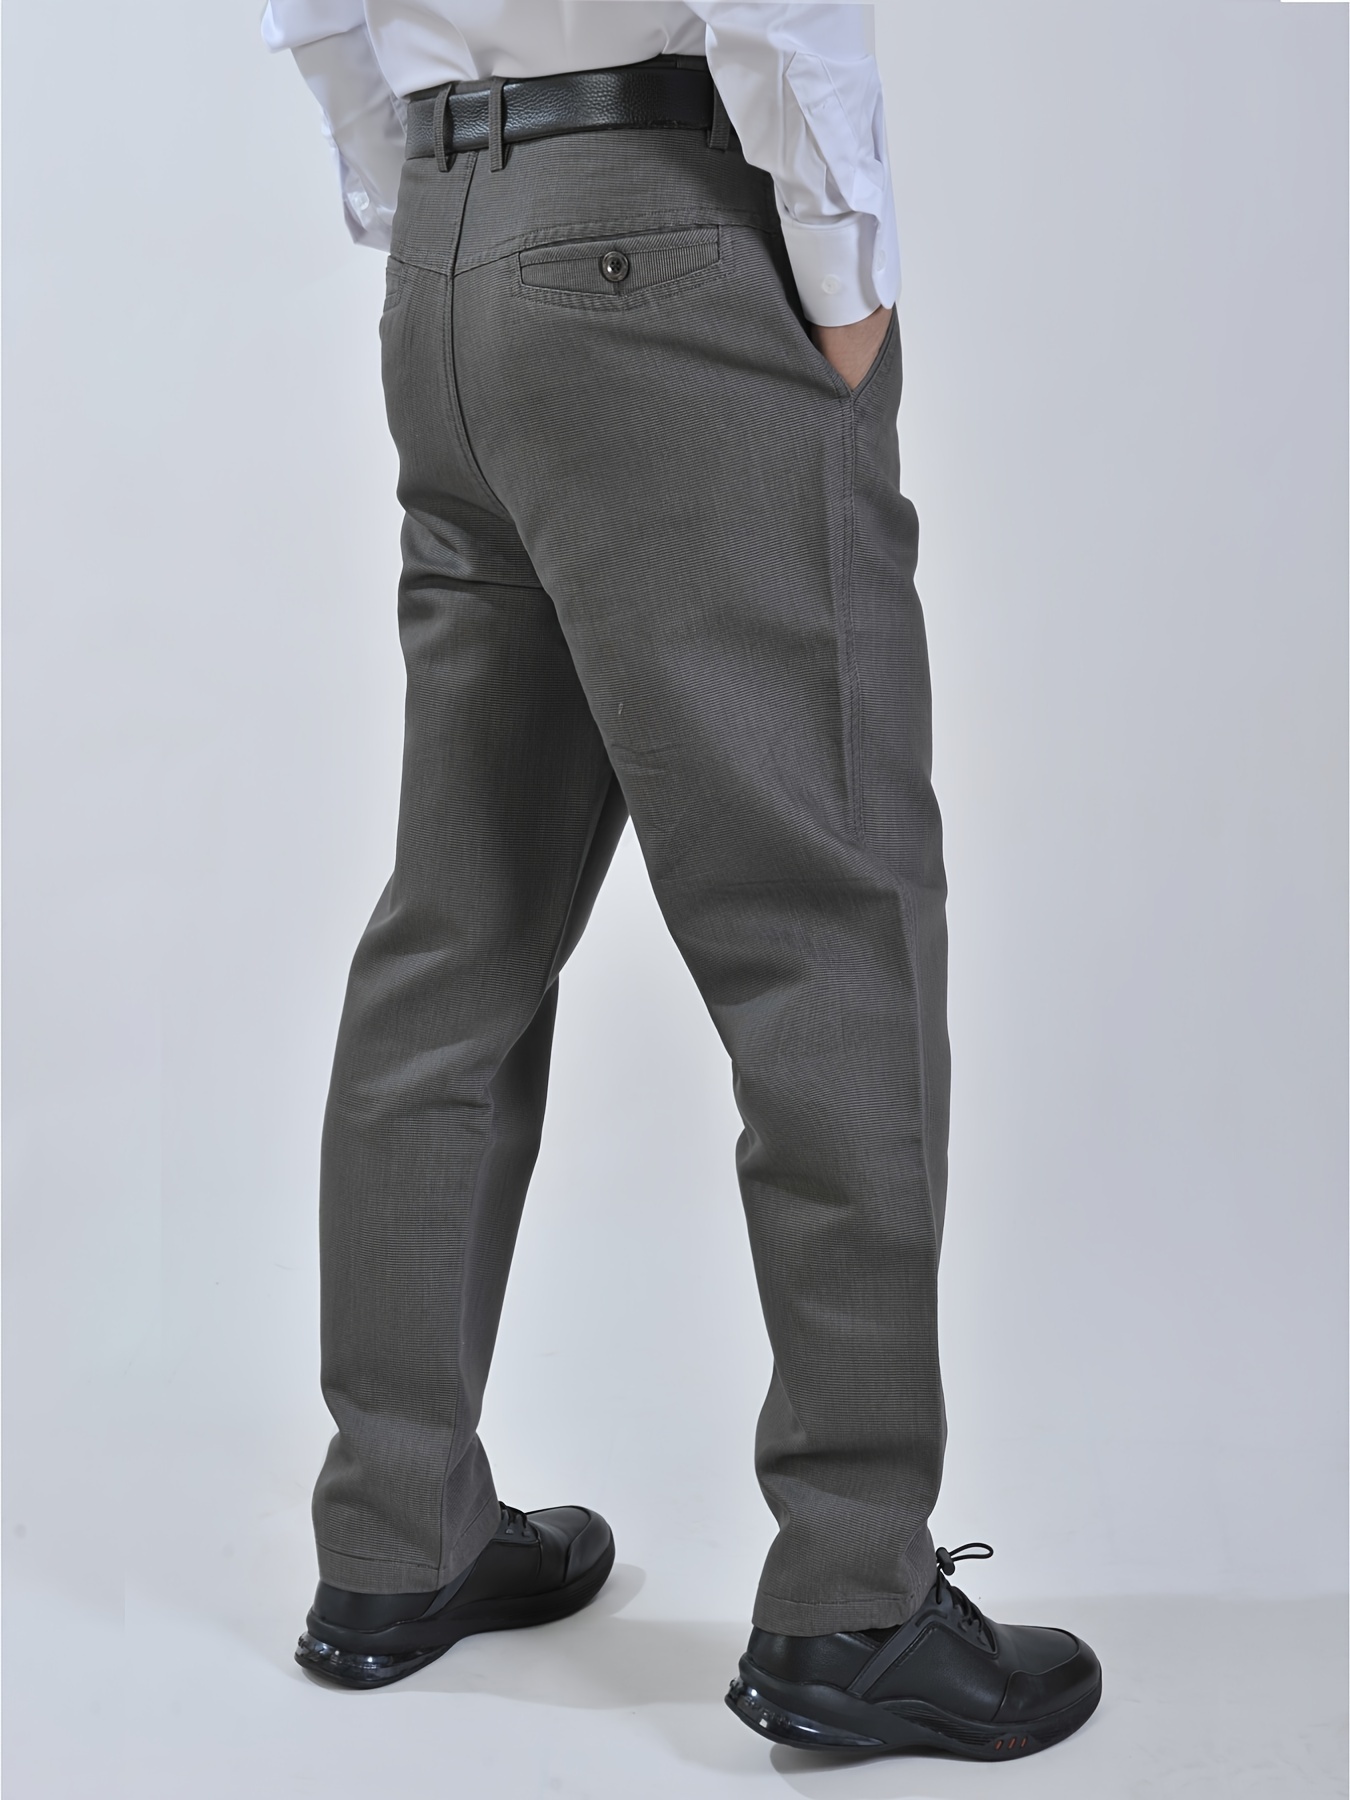 Korean Style Suit Pants Men's Casual Pants Pleated Loose Fitting